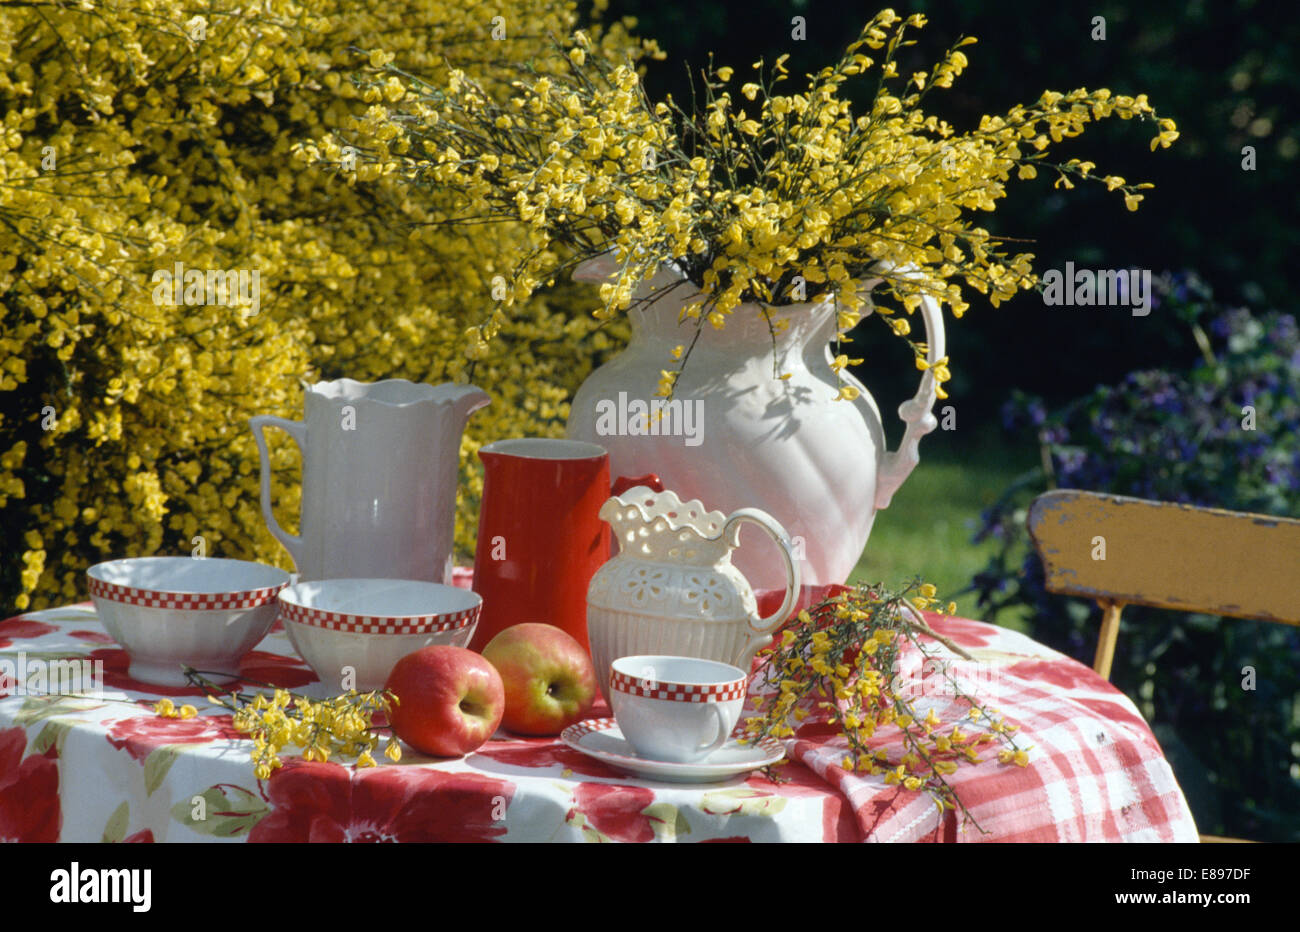 Still-Life of yellow broom in white jugs on table with crockery and red+white floral cloth Stock Photo